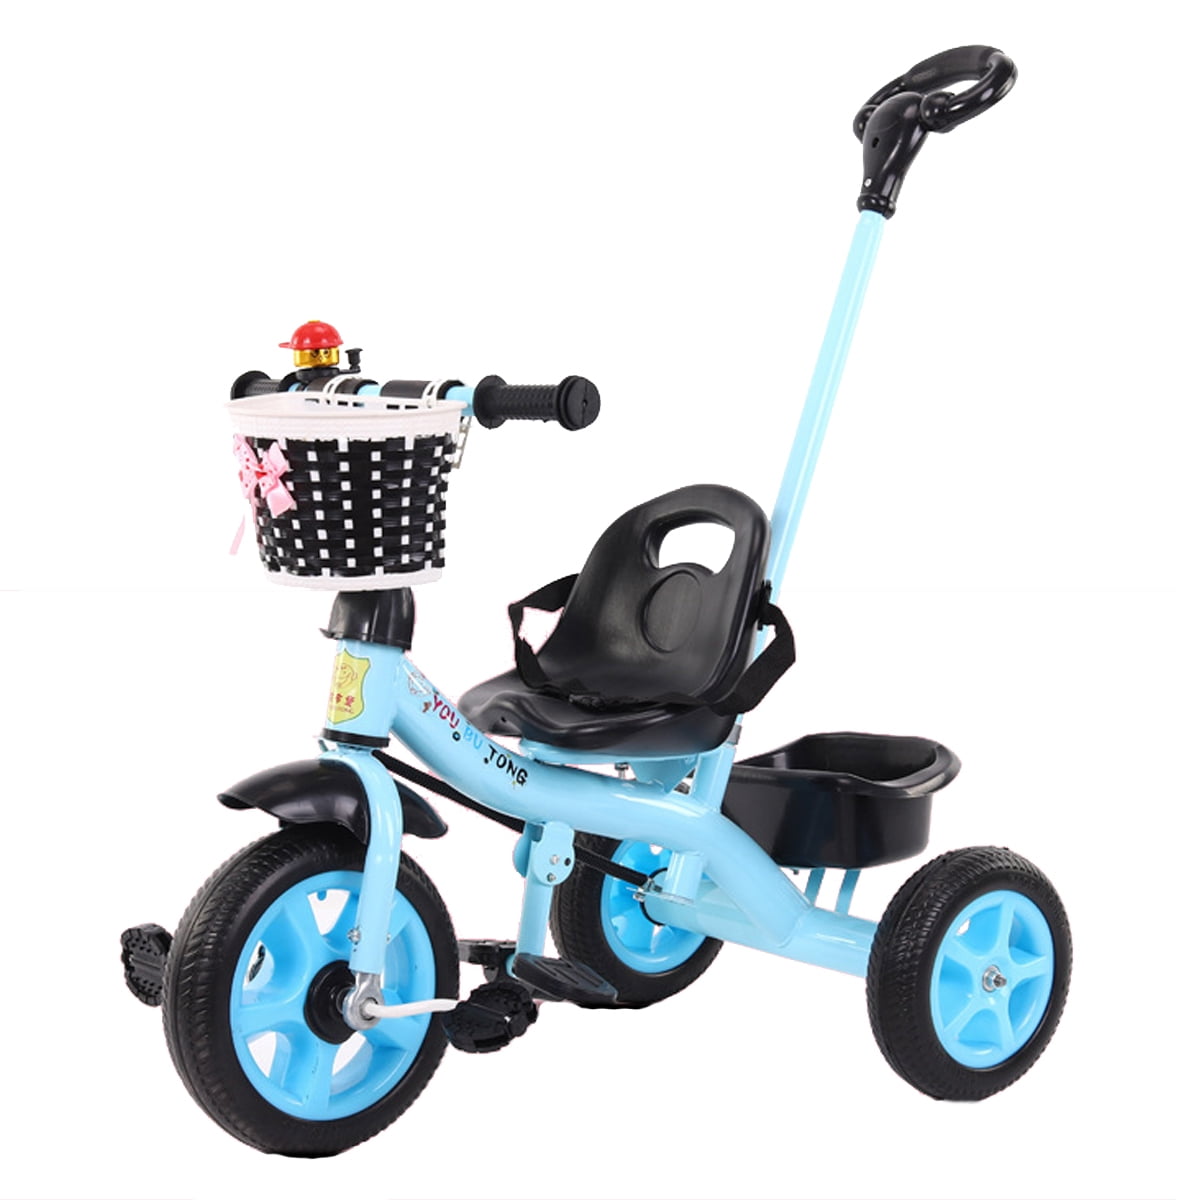 Childrens Tricycle Foldable Foot Pedal 1-6 Year Old Baby Push Pedal Bike Kindergarten Stroller Seat Can Be Adjusted Front and Back